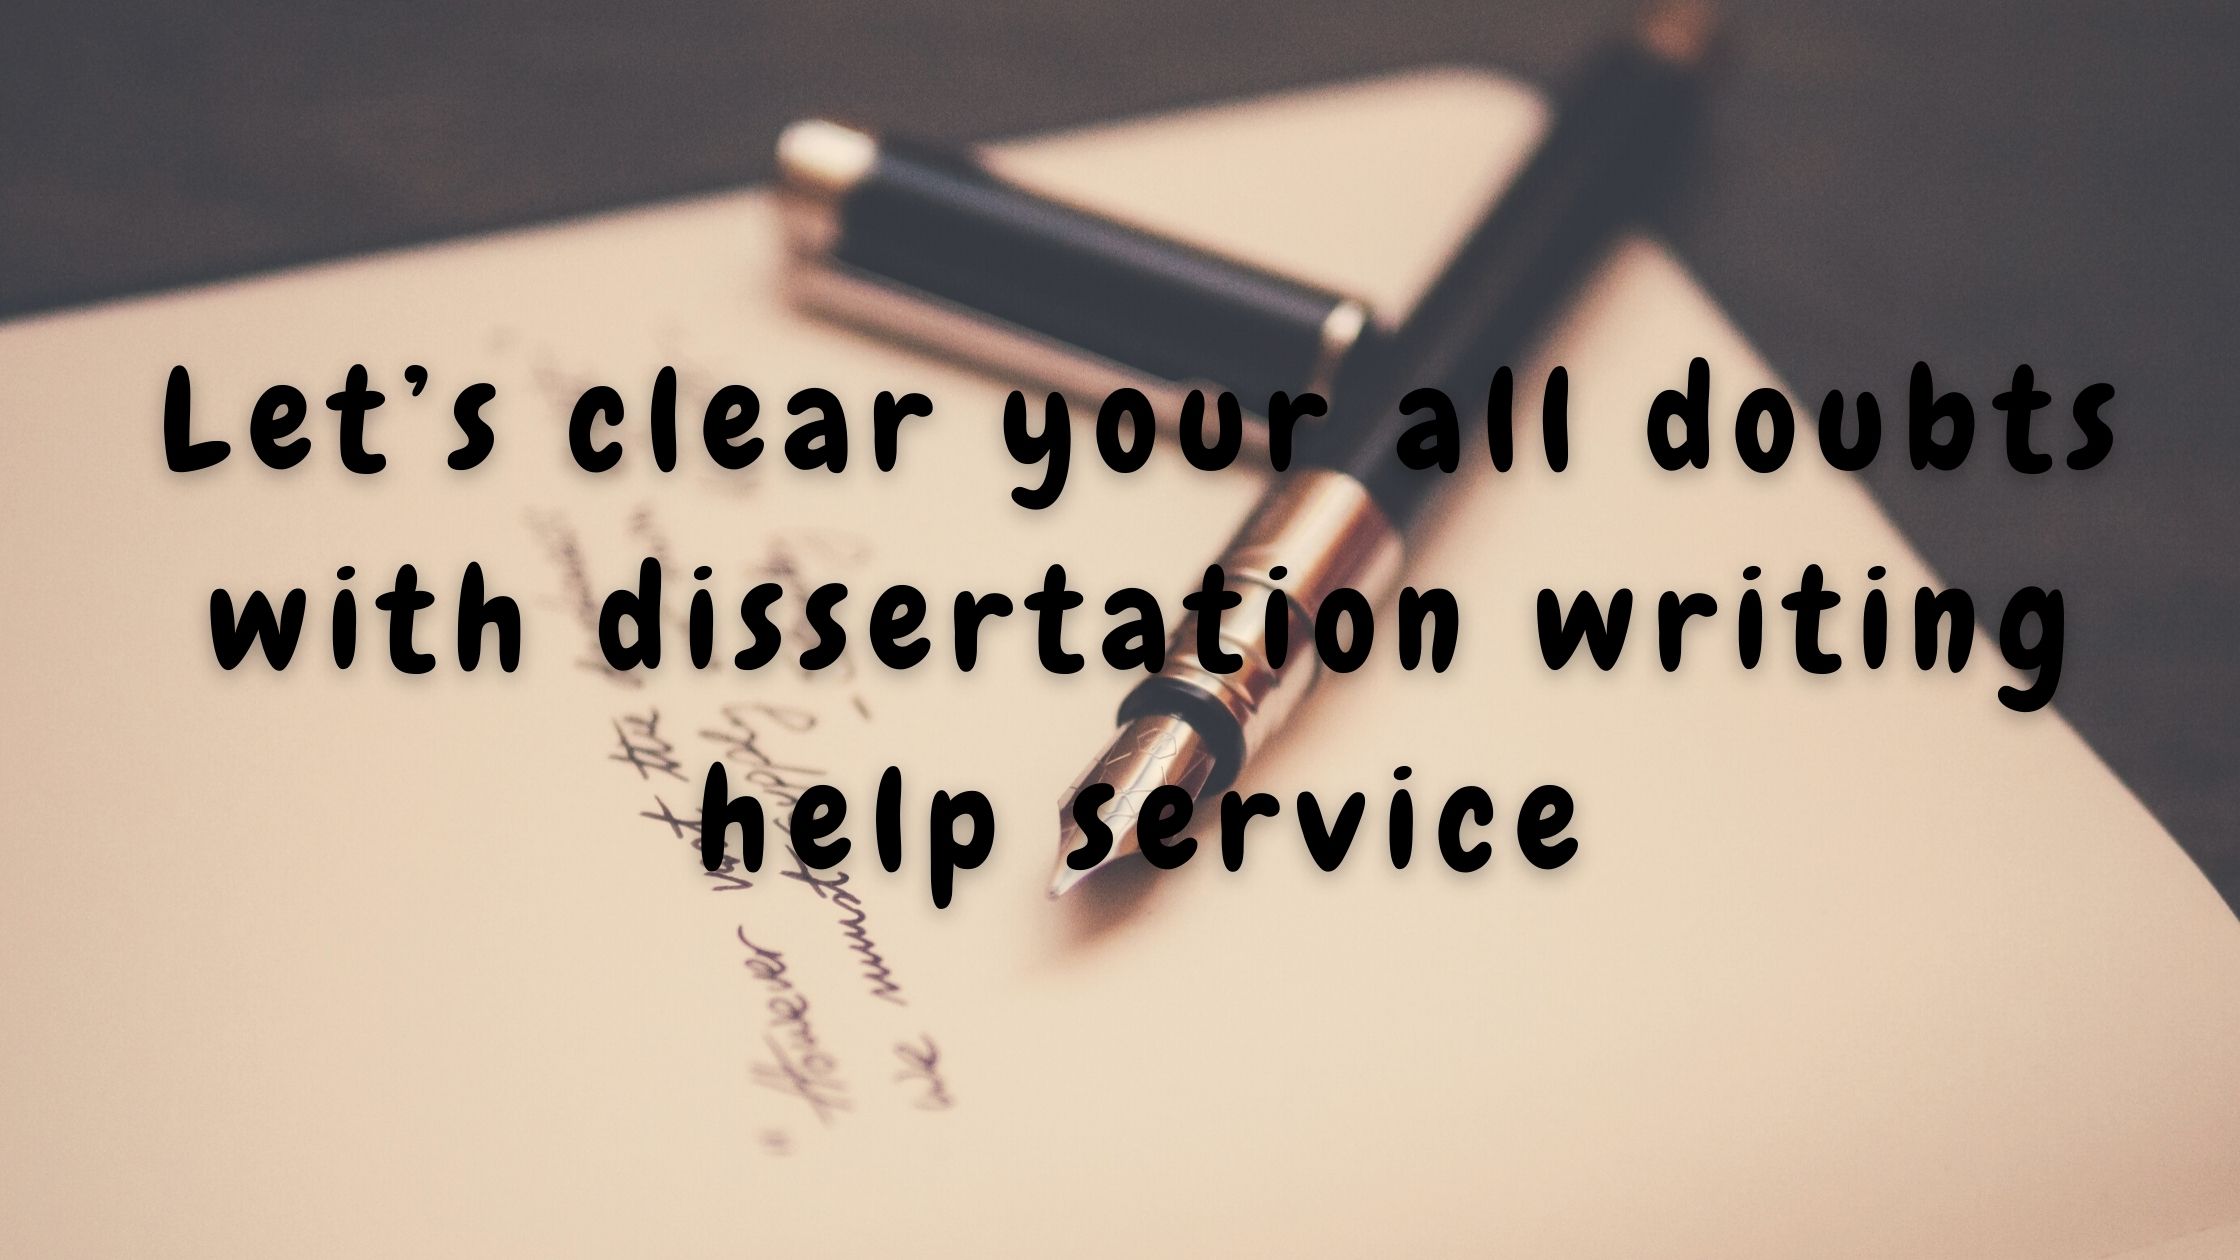 Let’s Clear Your All Doubts With Dissertation Writing Help Service